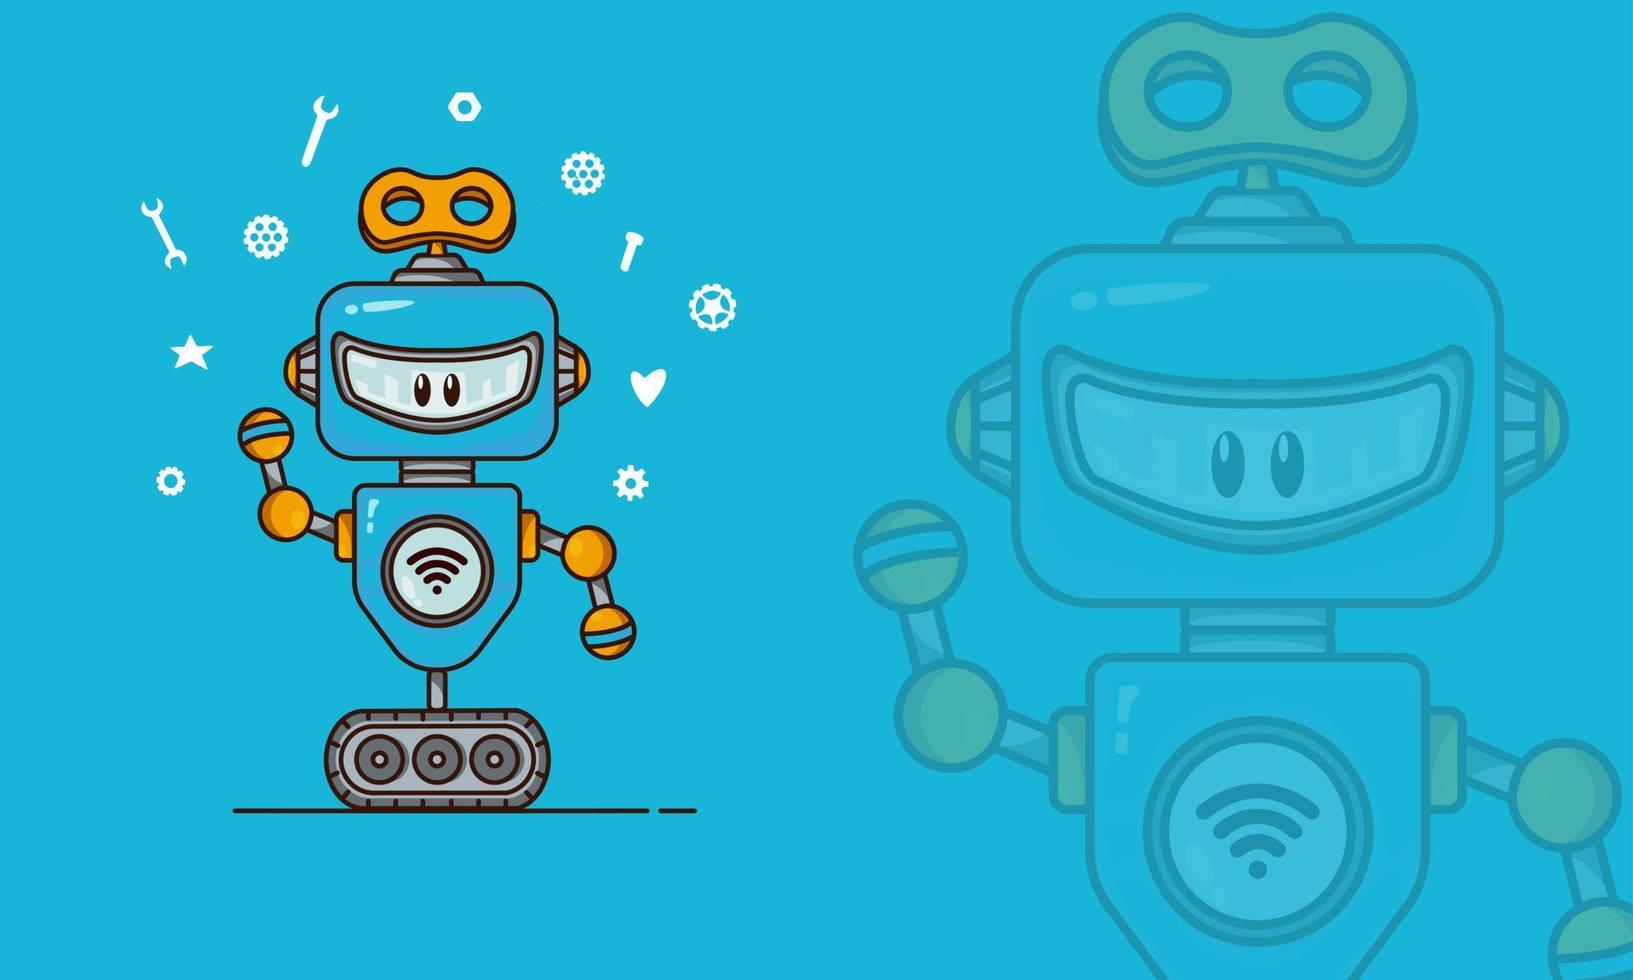 Cute blue robot on blue background. Graphic vector illustration. Cyborg futuristic design robotic toy robot. Robot technology machine future science toy. Cute element icon character, cartoon robot.